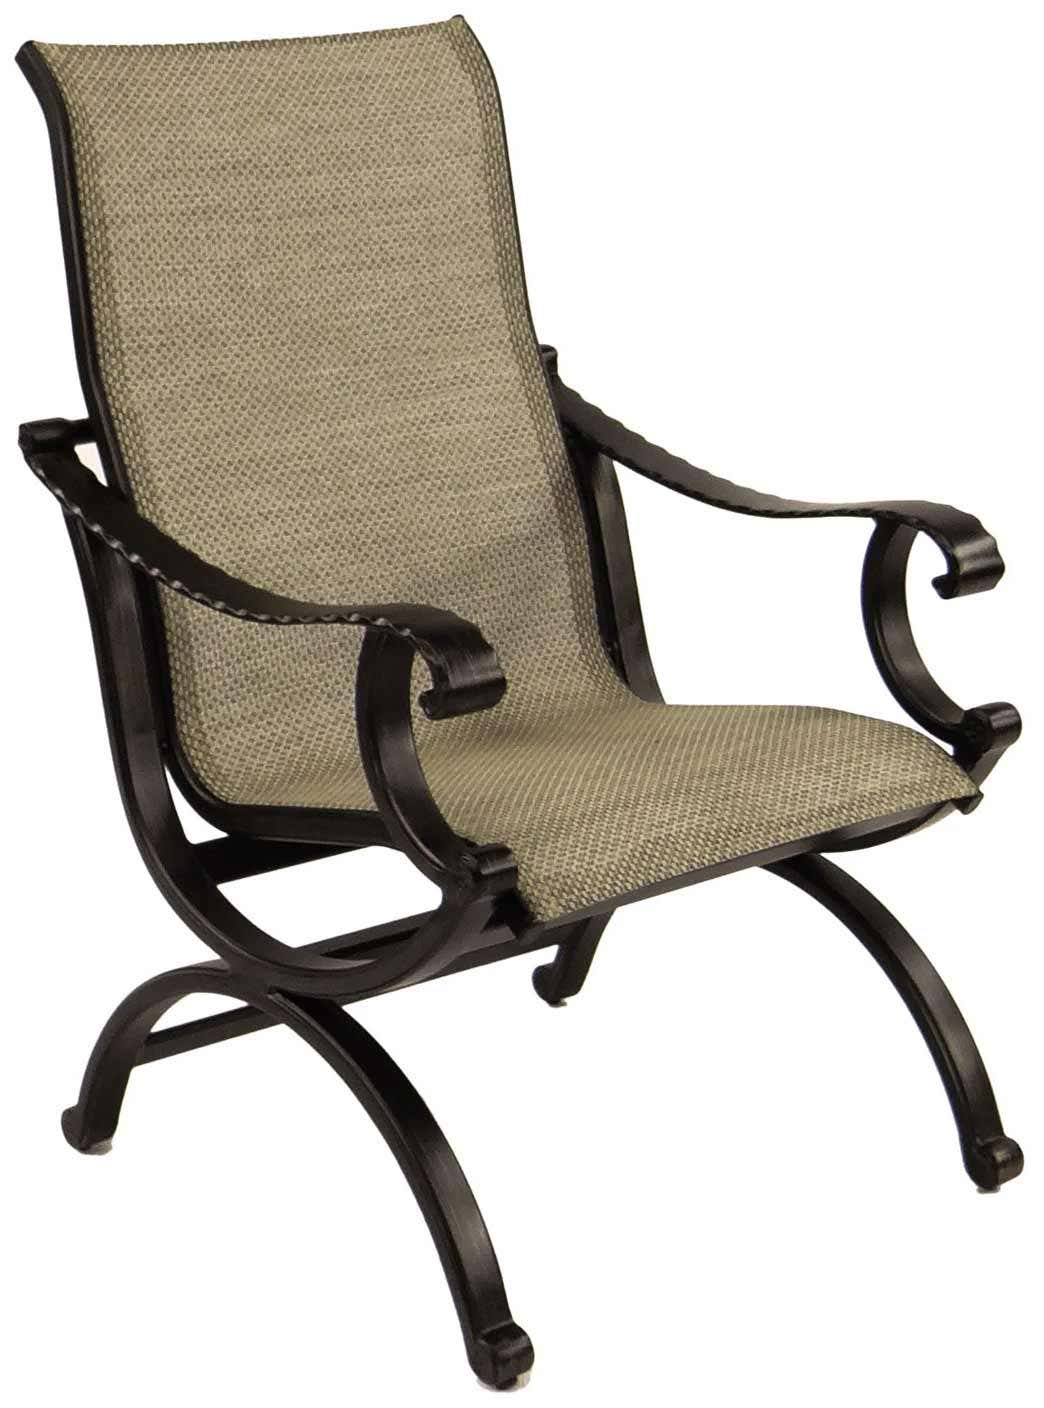 Castelle Telluride Sling Dining Chair with Antique Walnut Frame and Augustine Oyster Fabric Outdoor Chairs 12030655